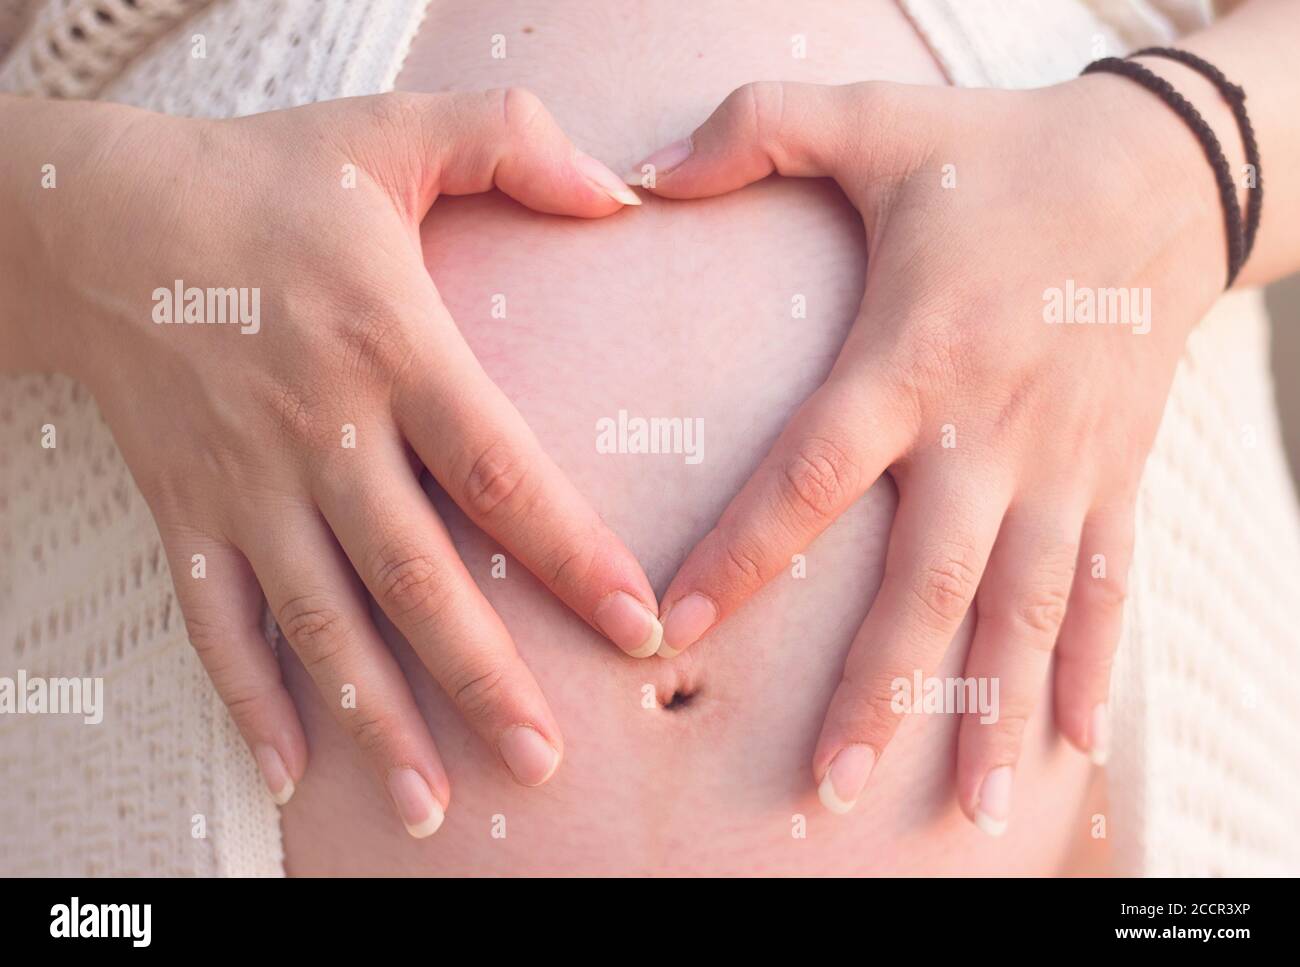 Pregnant Woman holding her hands in a heart shape on her belly. Heart symbol, maternity and family concept Stock Photo